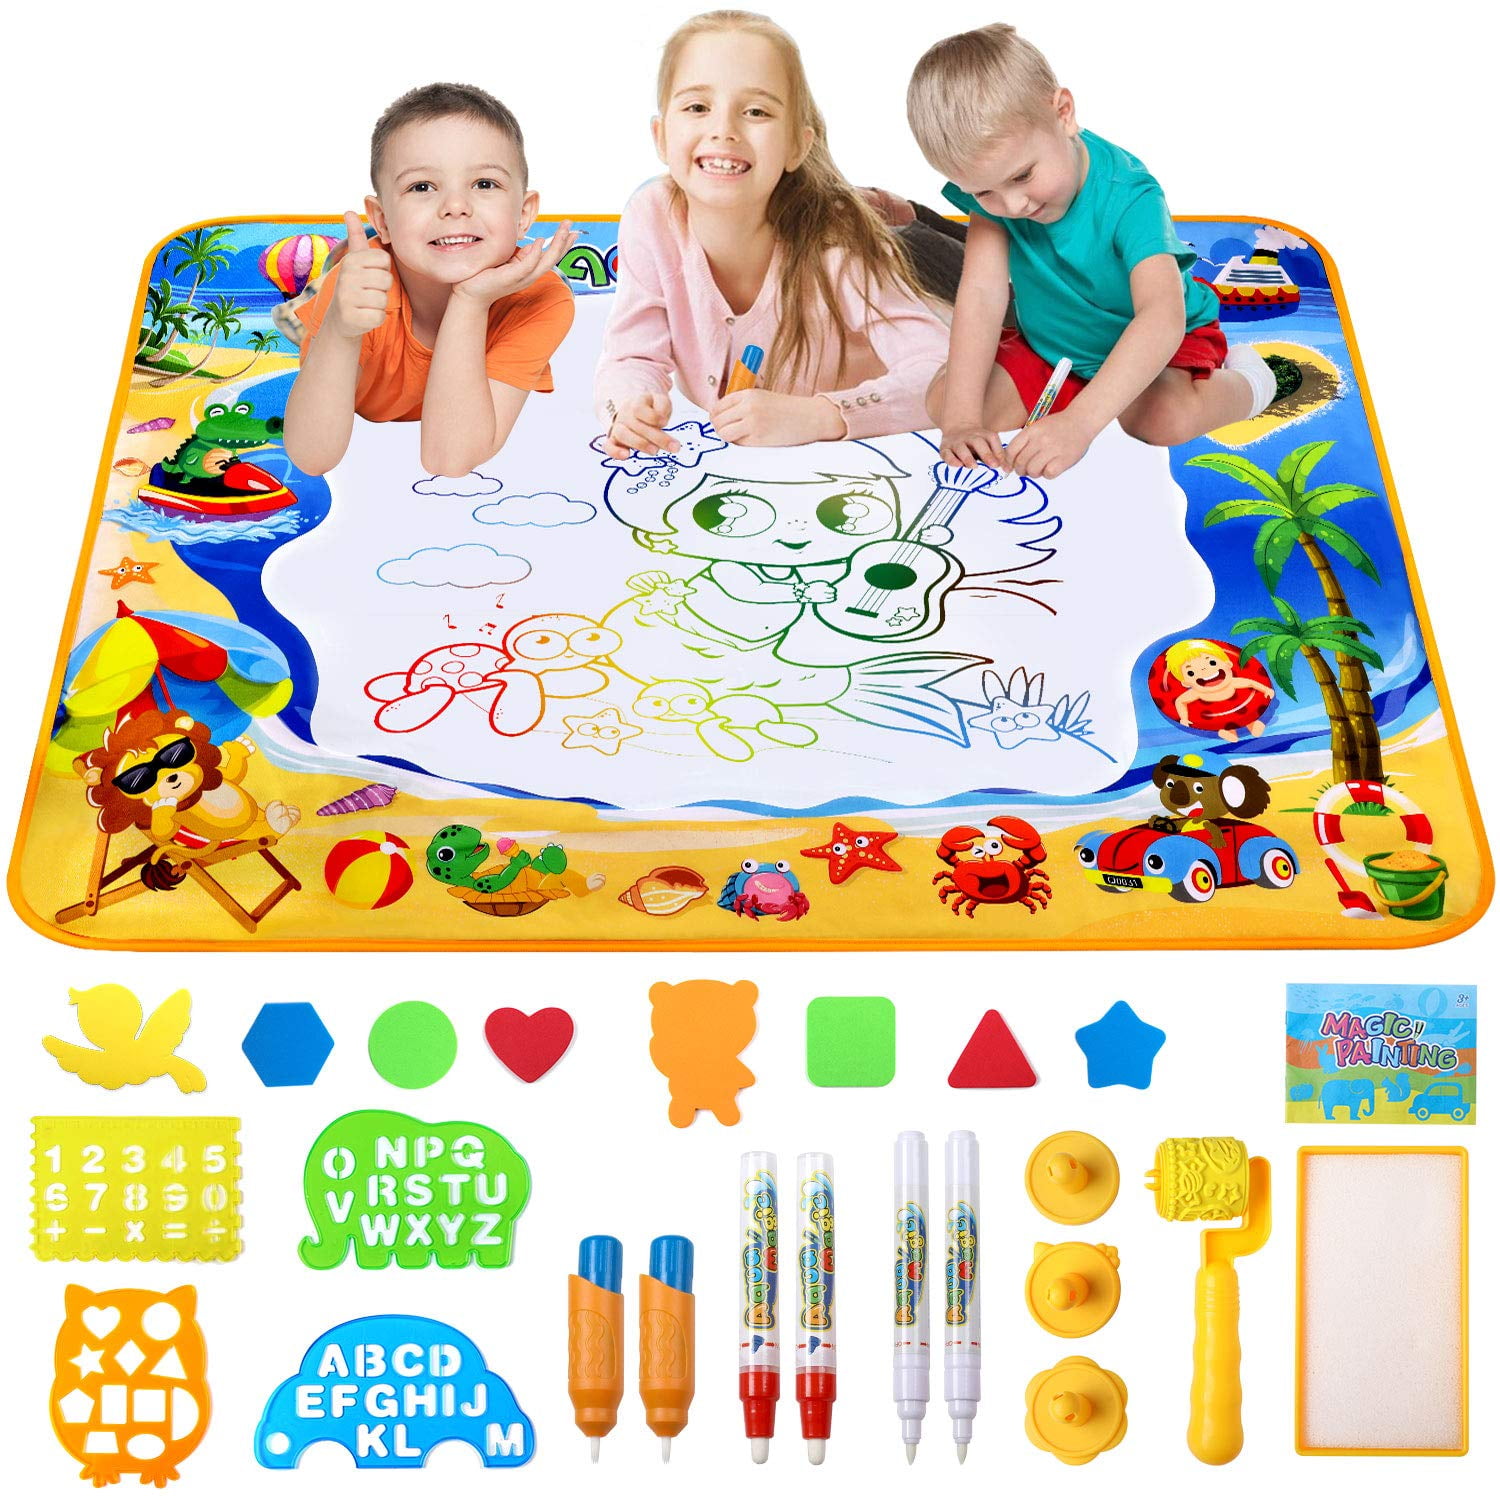 JYC 4Color Water Drawing Mat Board & Magic Pen Doodle On Sale.Clearance Kids Toy Gift 46X30cm